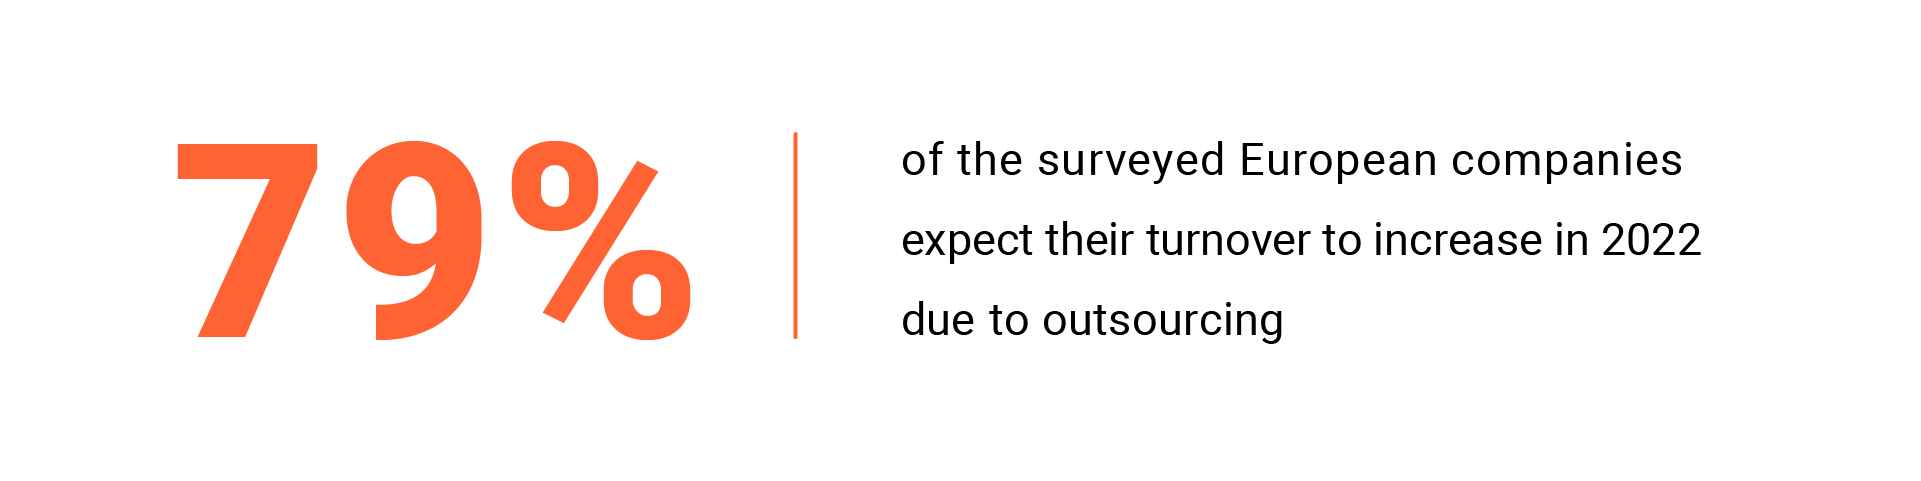 79% of the surveyed European companies expect their turnover to increase in 2022 due to outsourcing